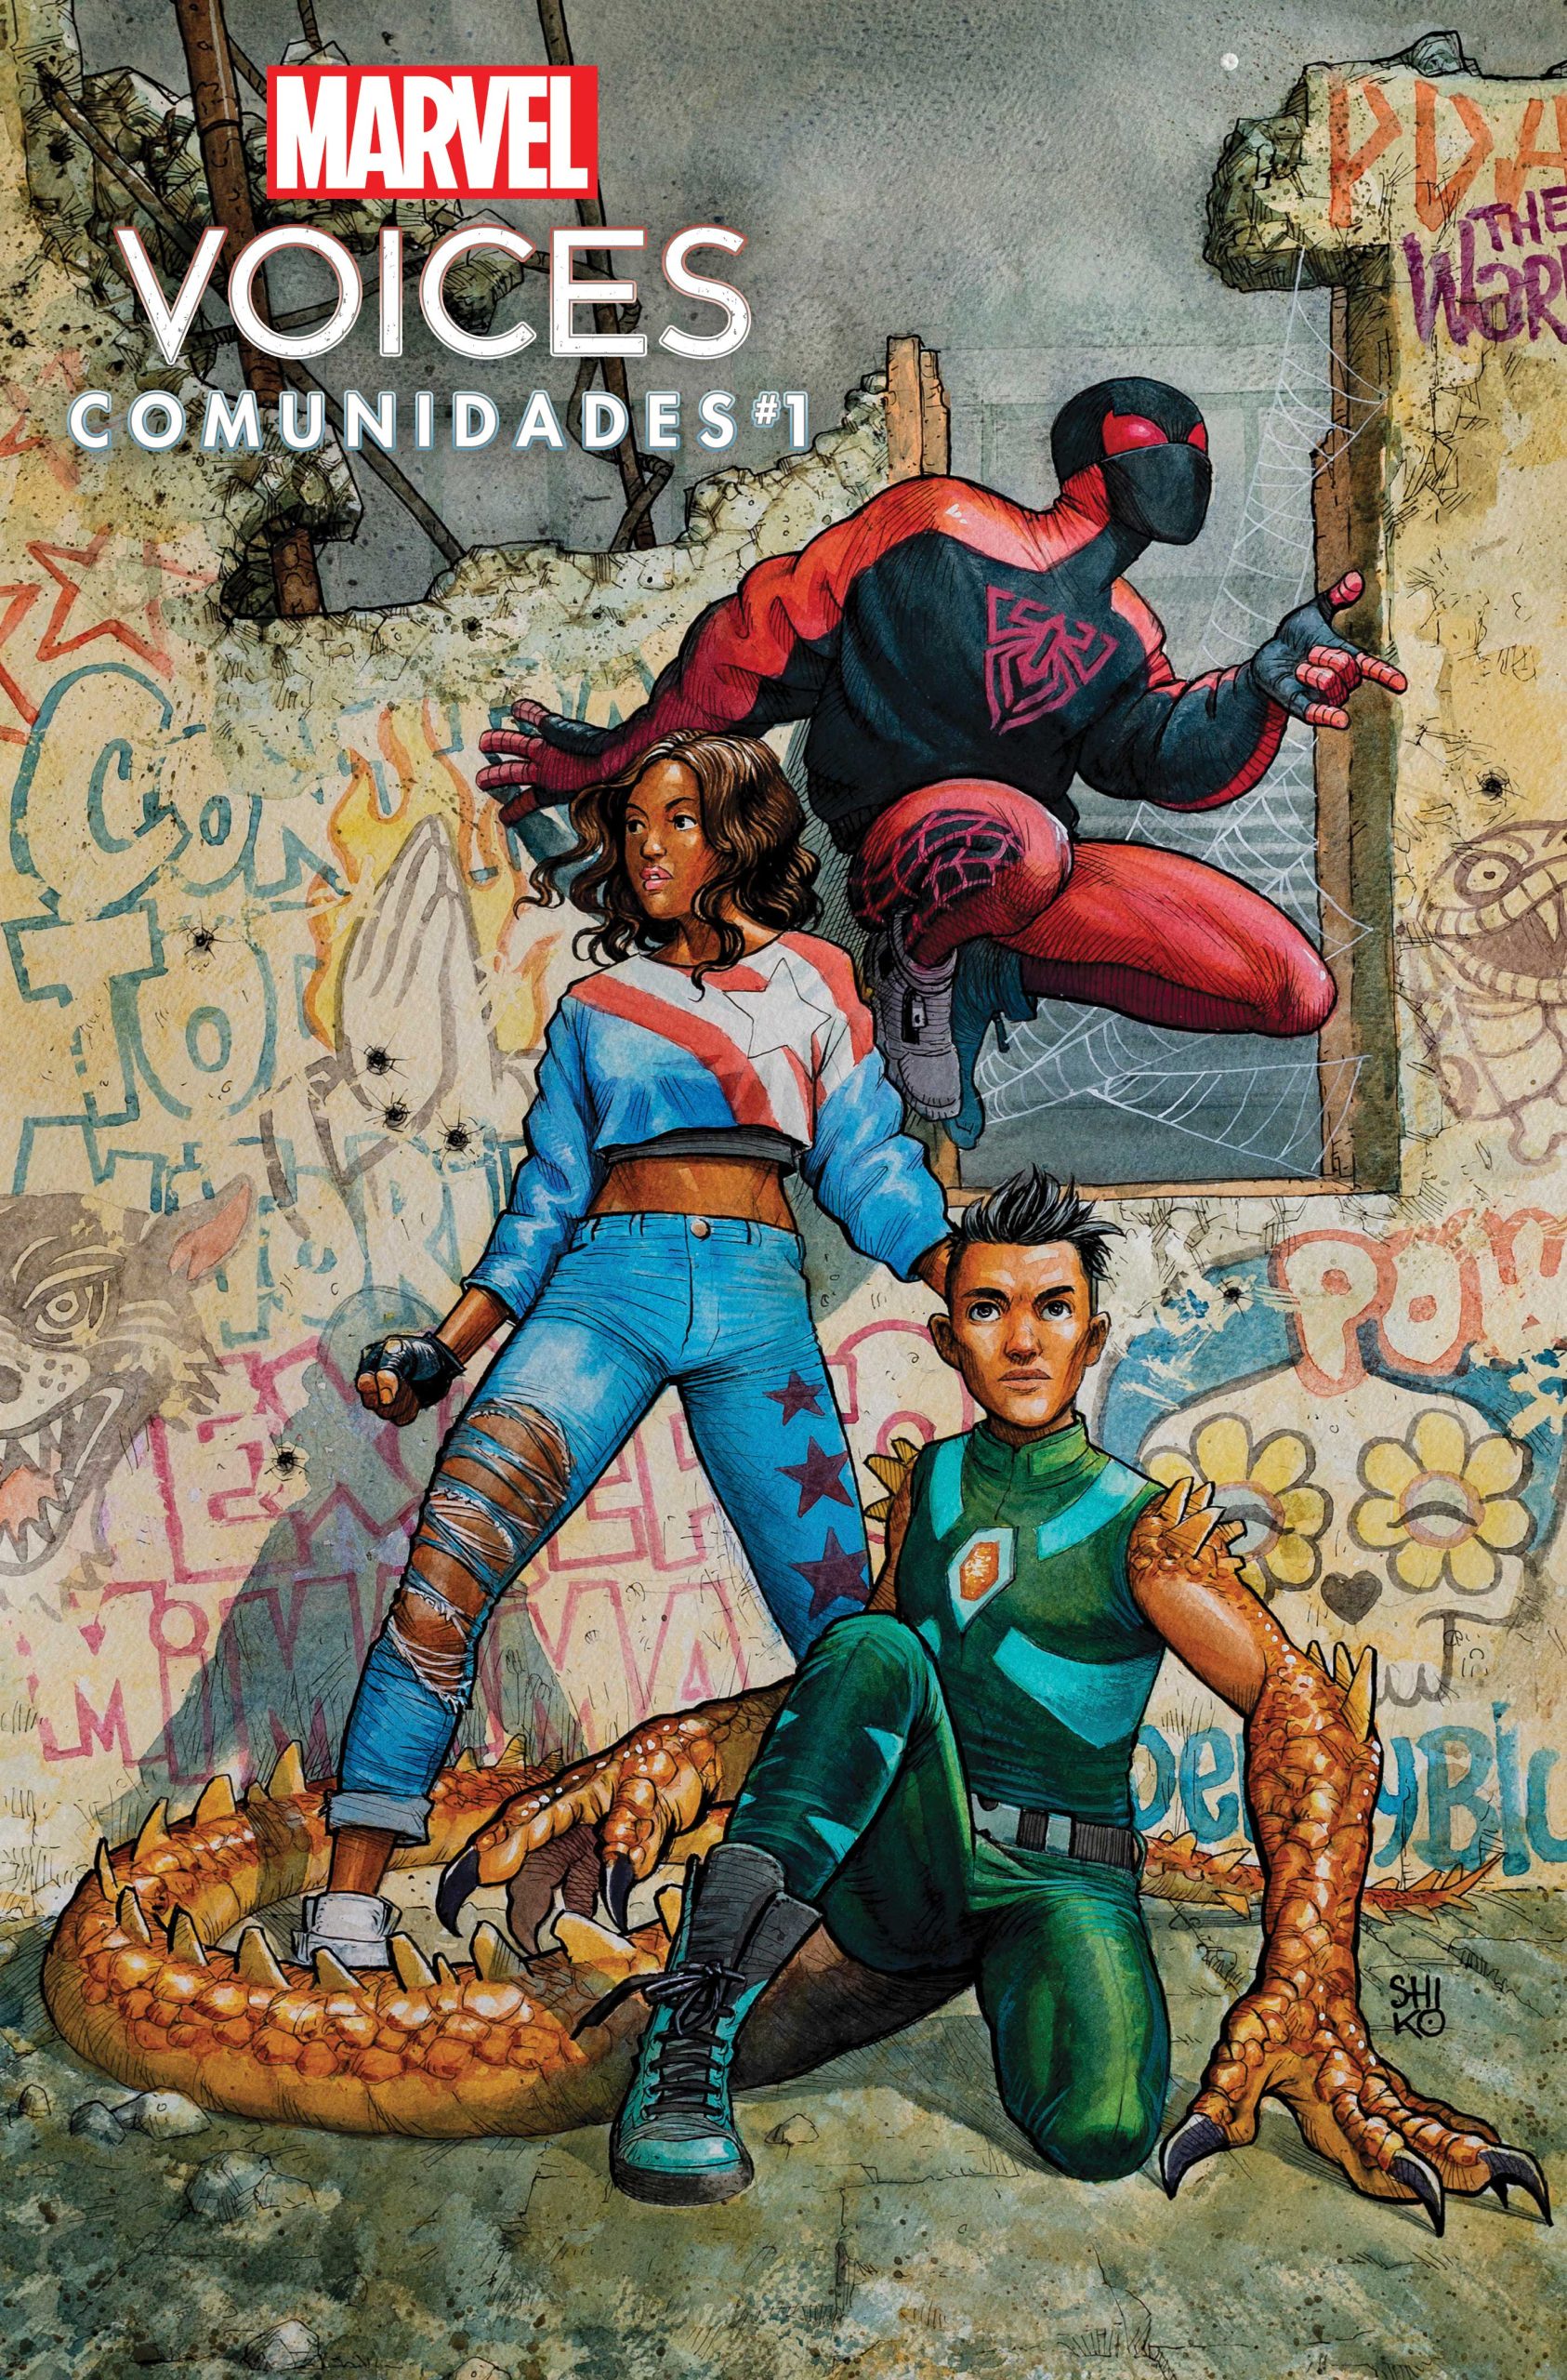 MARVEL’S VOICES: COMUNIDADES #1 Variant Cover by CHIKO SHIKO